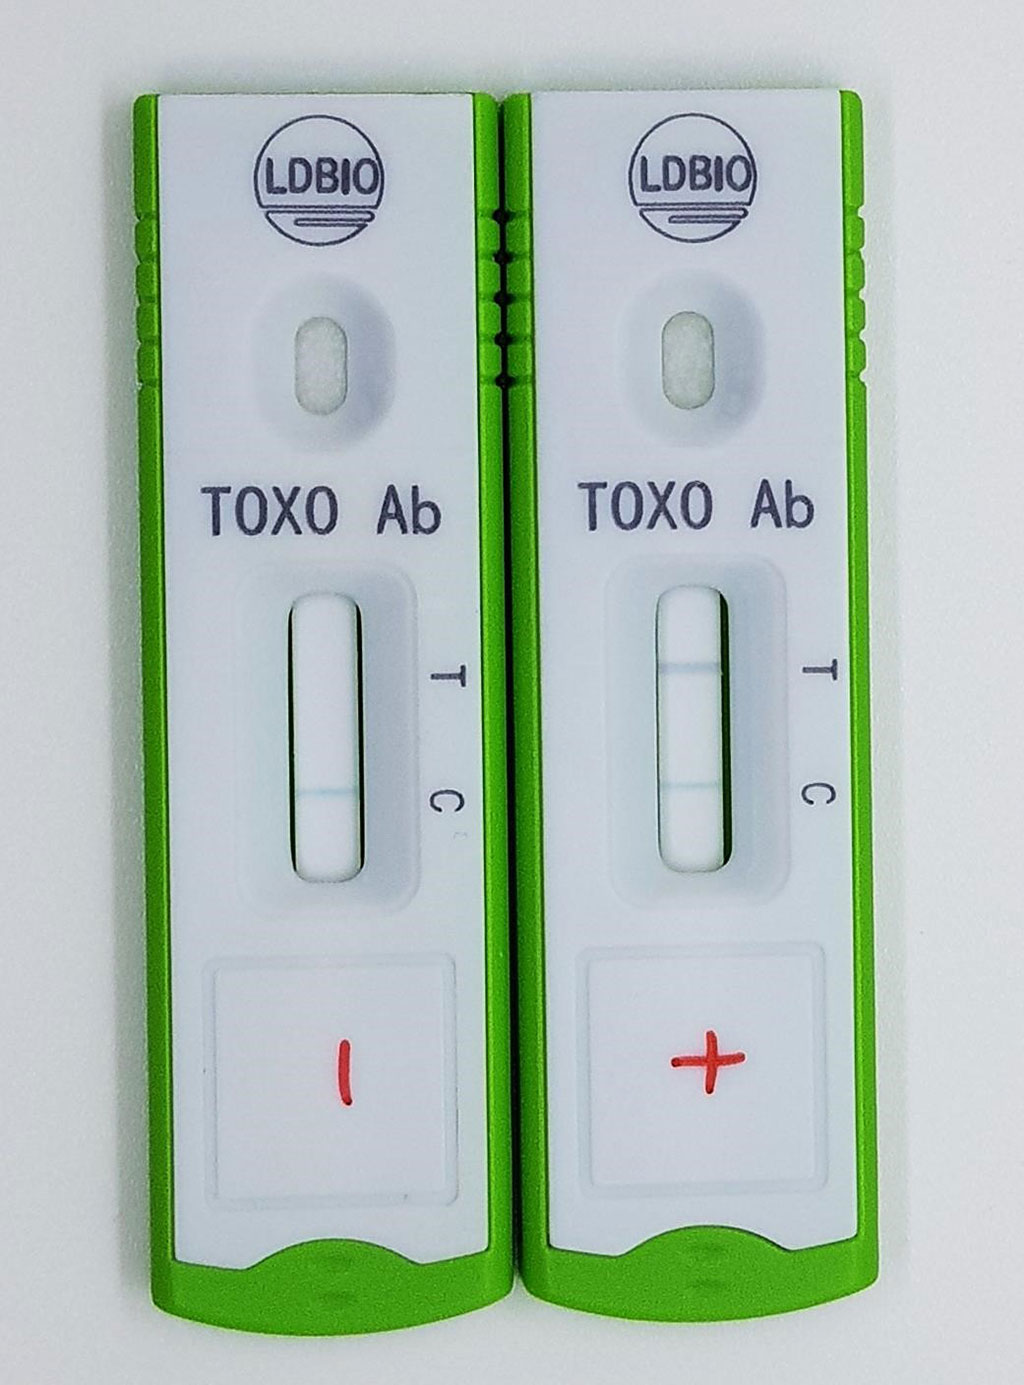 Image: TOXOPLASMA ICT IgG-IgM is a unitary qualitative rapid test based on the immune chromatography technology (lateral flow), allowing the simultaneous detection of both IgG and IgM class anti-Toxoplasma antibodies in human sera (Photo courtesy of LDBIO DIAGNOSTICS)